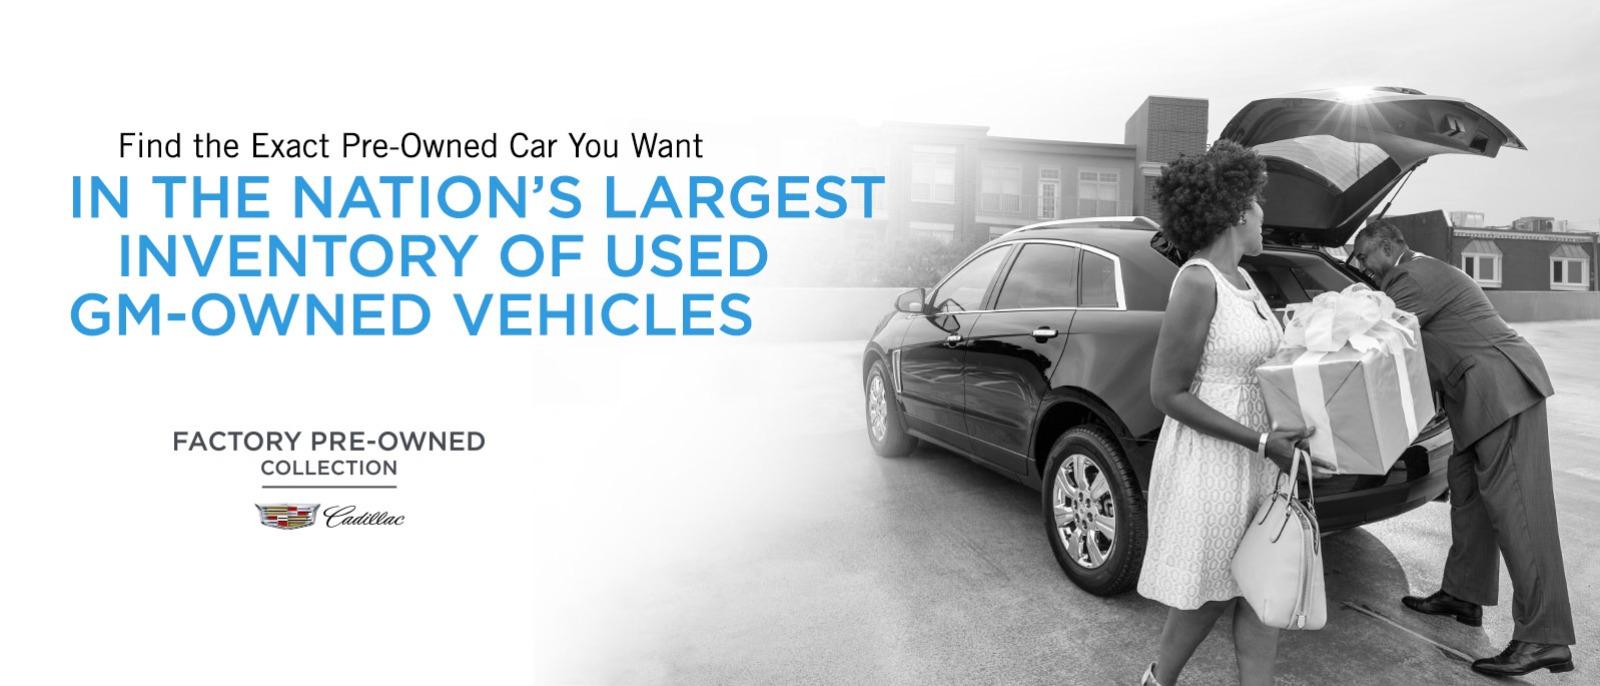 Find the exact pre-owned car you want at Bob Moore Cadillac of Edmond.